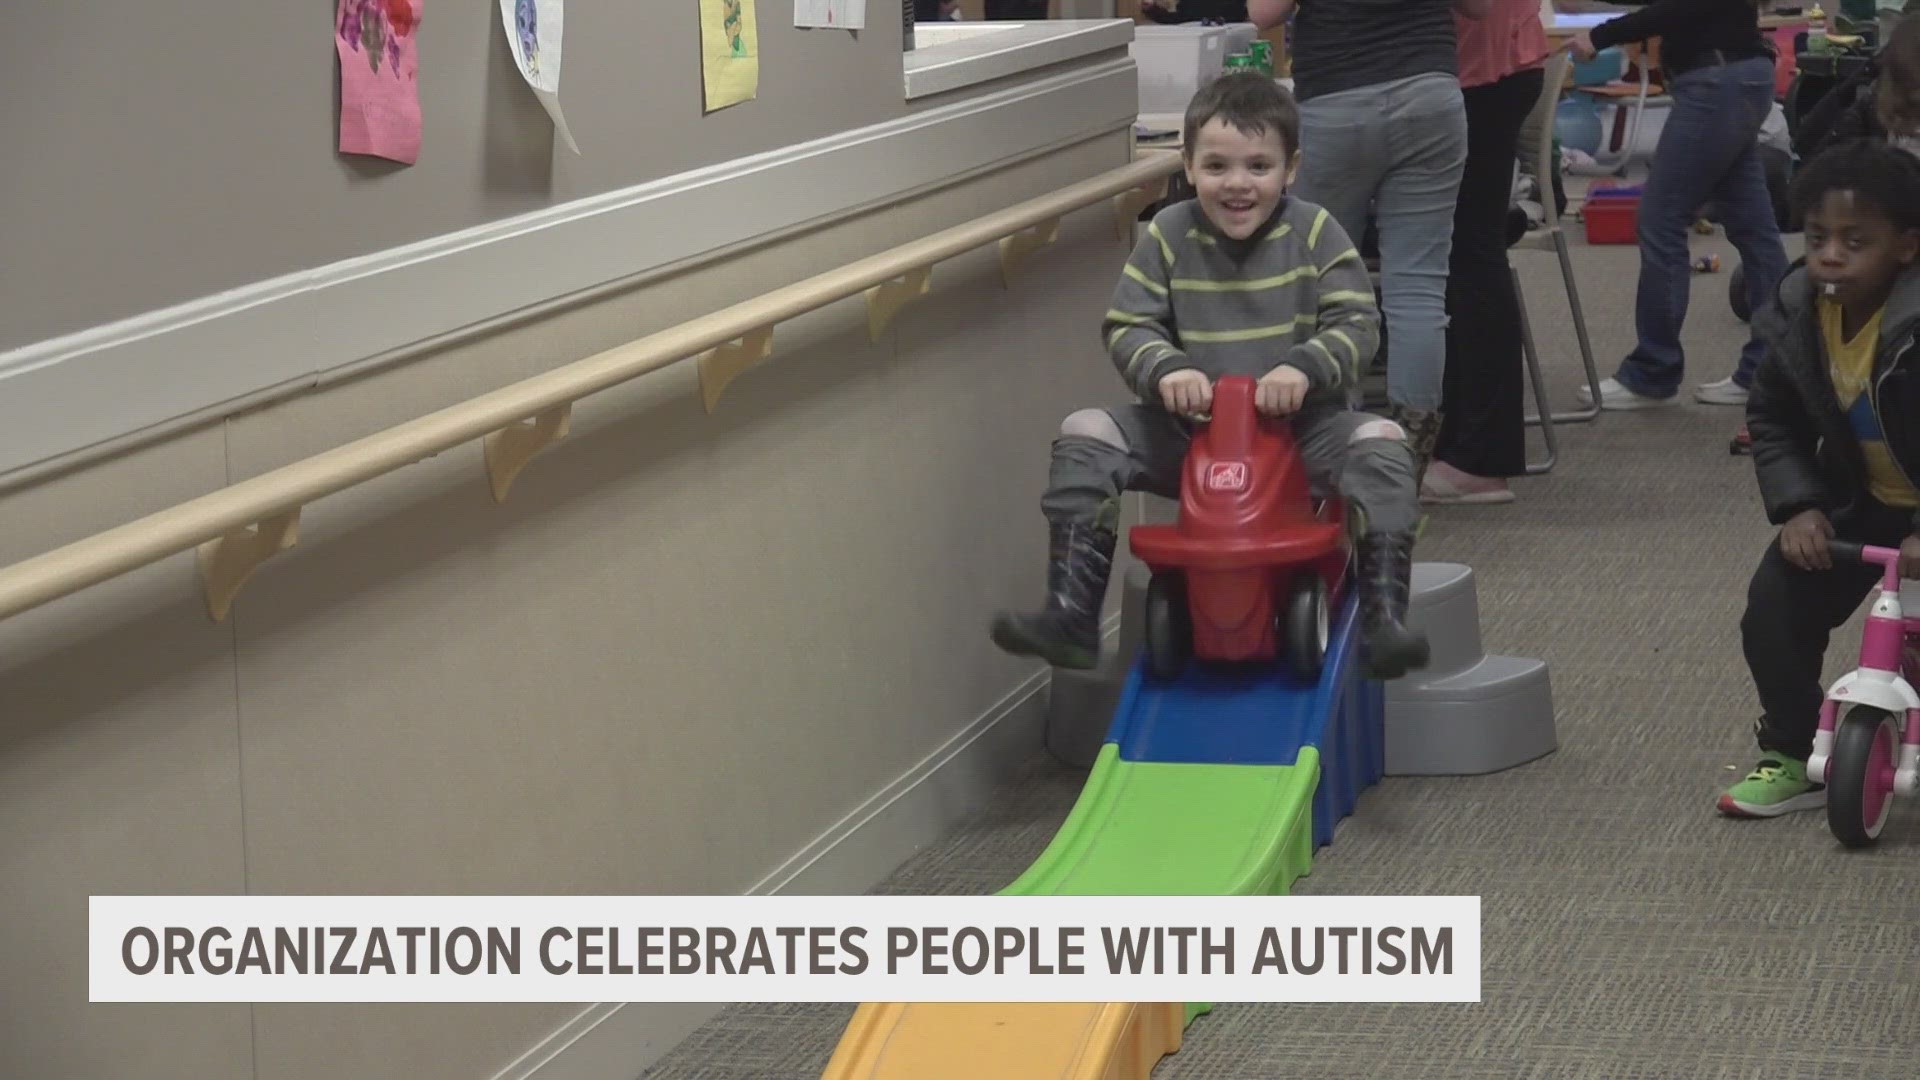 Ripple Effects Community Inclusion Center marked the occasion by offering families touched by autism a safe space to connect.